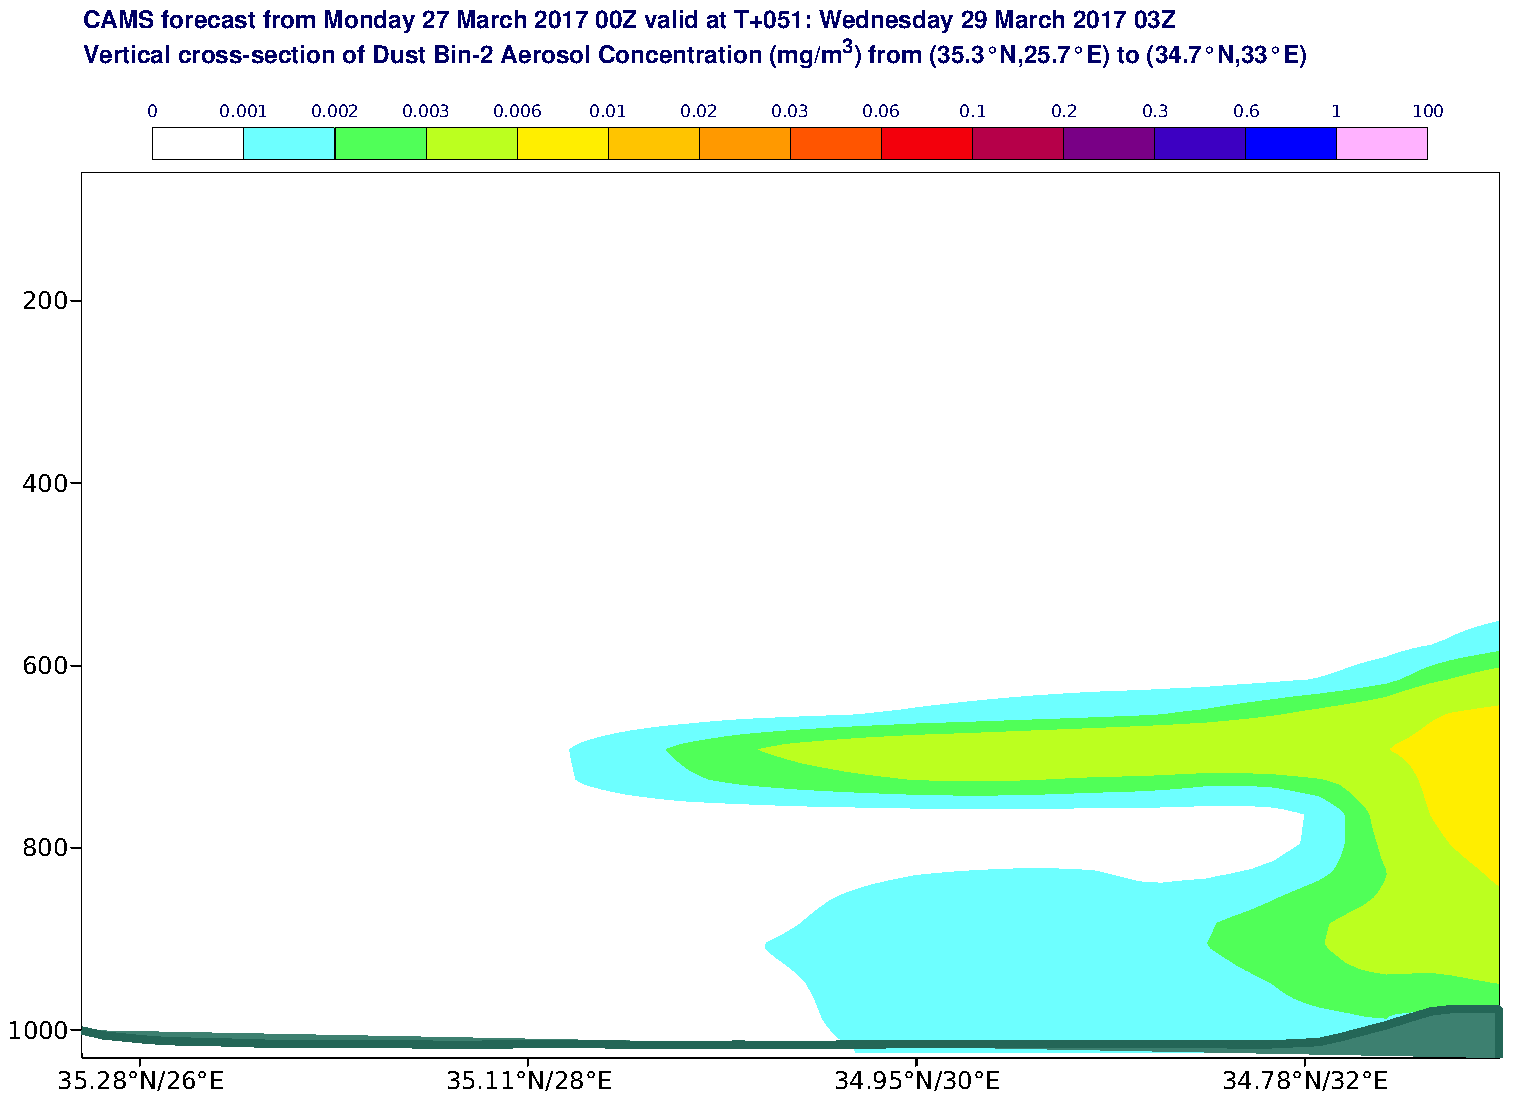 Vertical cross-section of Dust Bin-2 Aerosol Concentration (mg/m3) valid at T51 - 2017-03-29 03:00